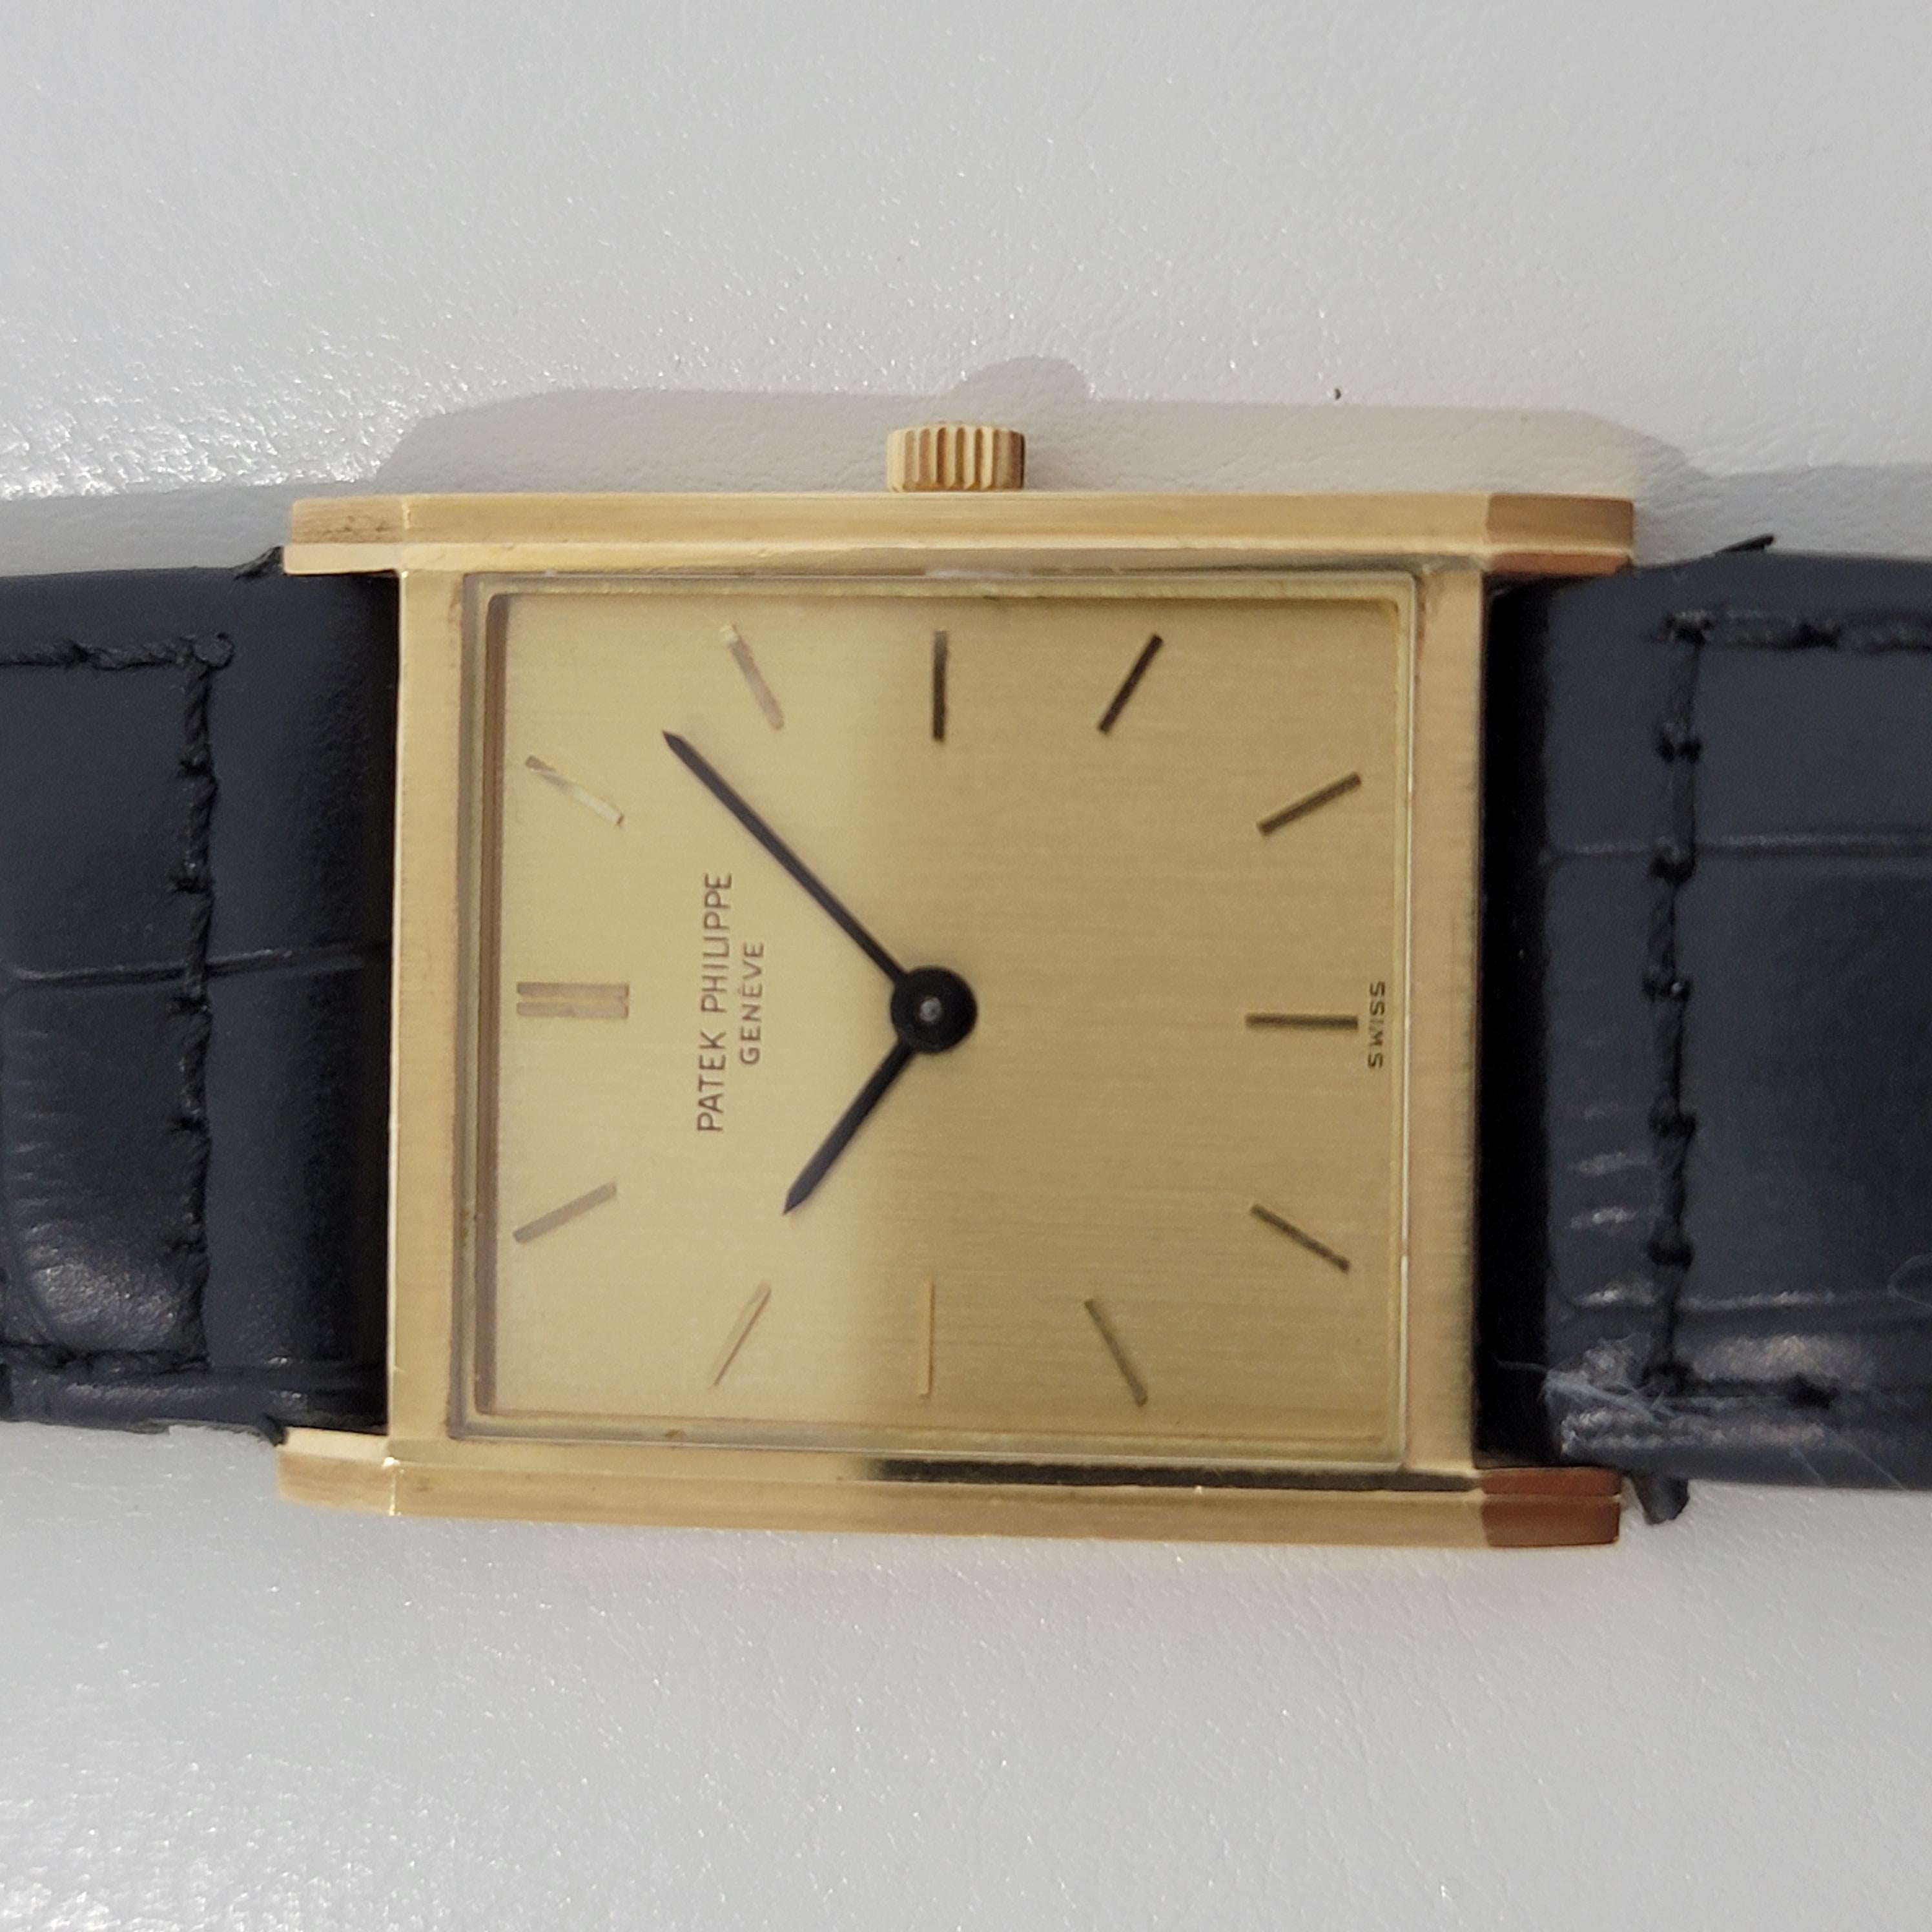 Timeless luxury, Men's 18k solid gold Patek Philippe Geneve Ref 3519 manual wind dress watch, c.1970s. Verified authentic by a master watchmaker. Gorgeous Patek Philippe signed gold dial, Geneve hallmarked, applied baton hour markers, minute and